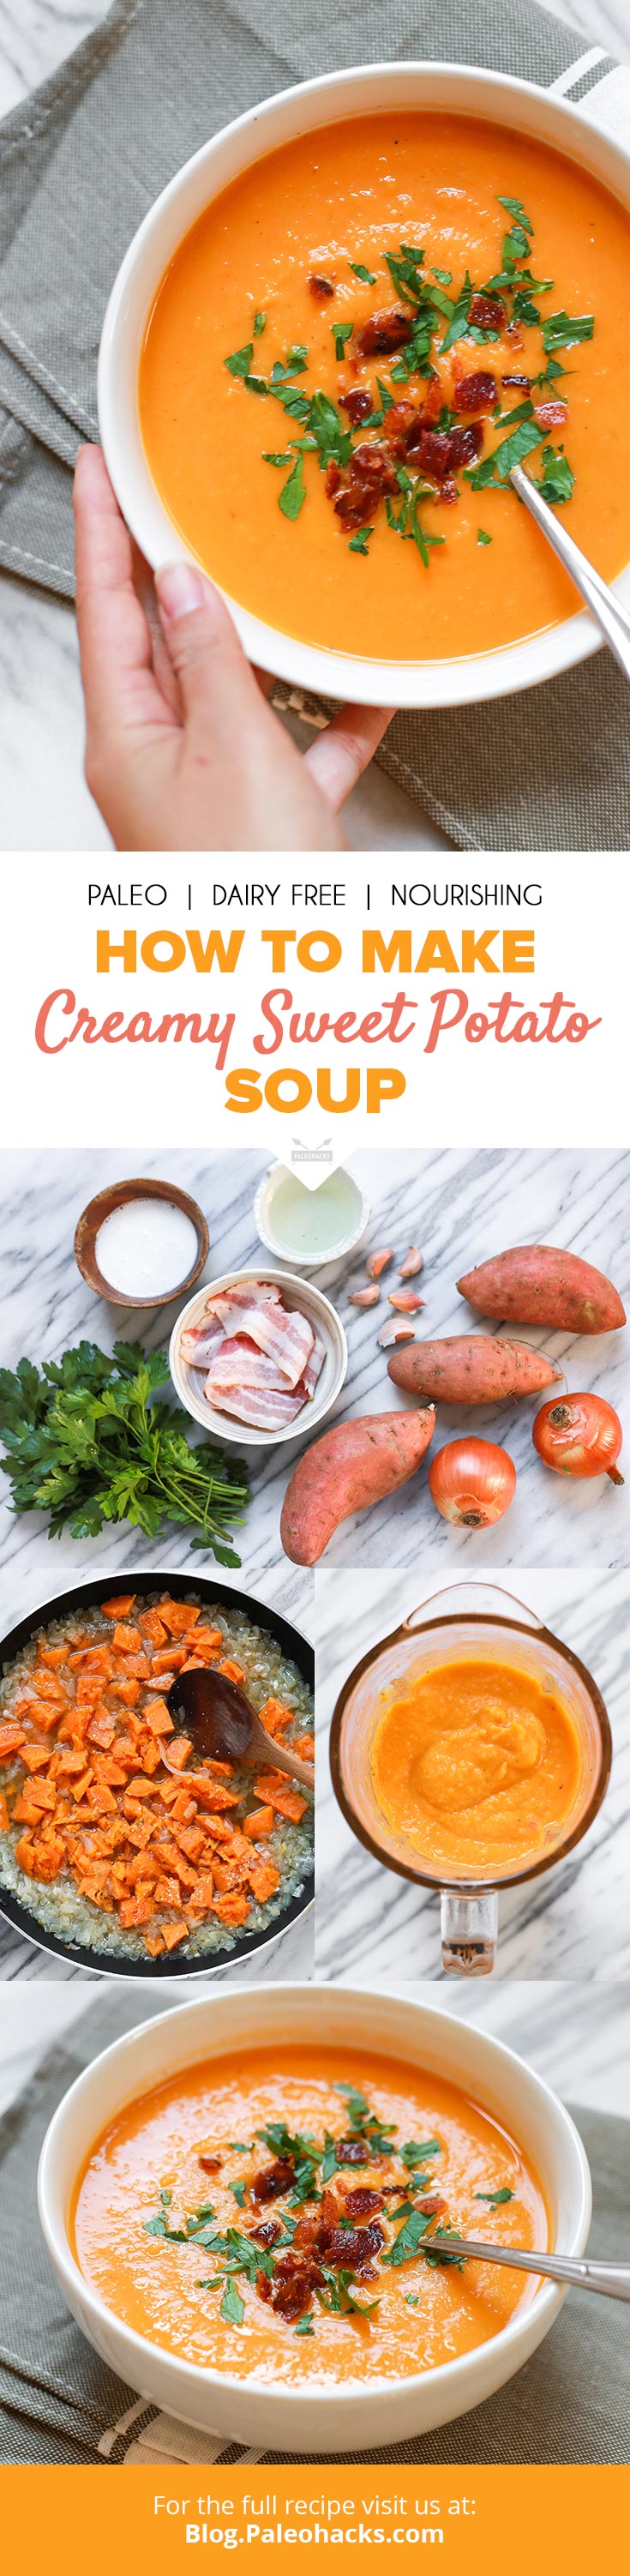 This creamy sweet potato soup with crumbled bacon tastes like a loaded baked potato in a bowl.